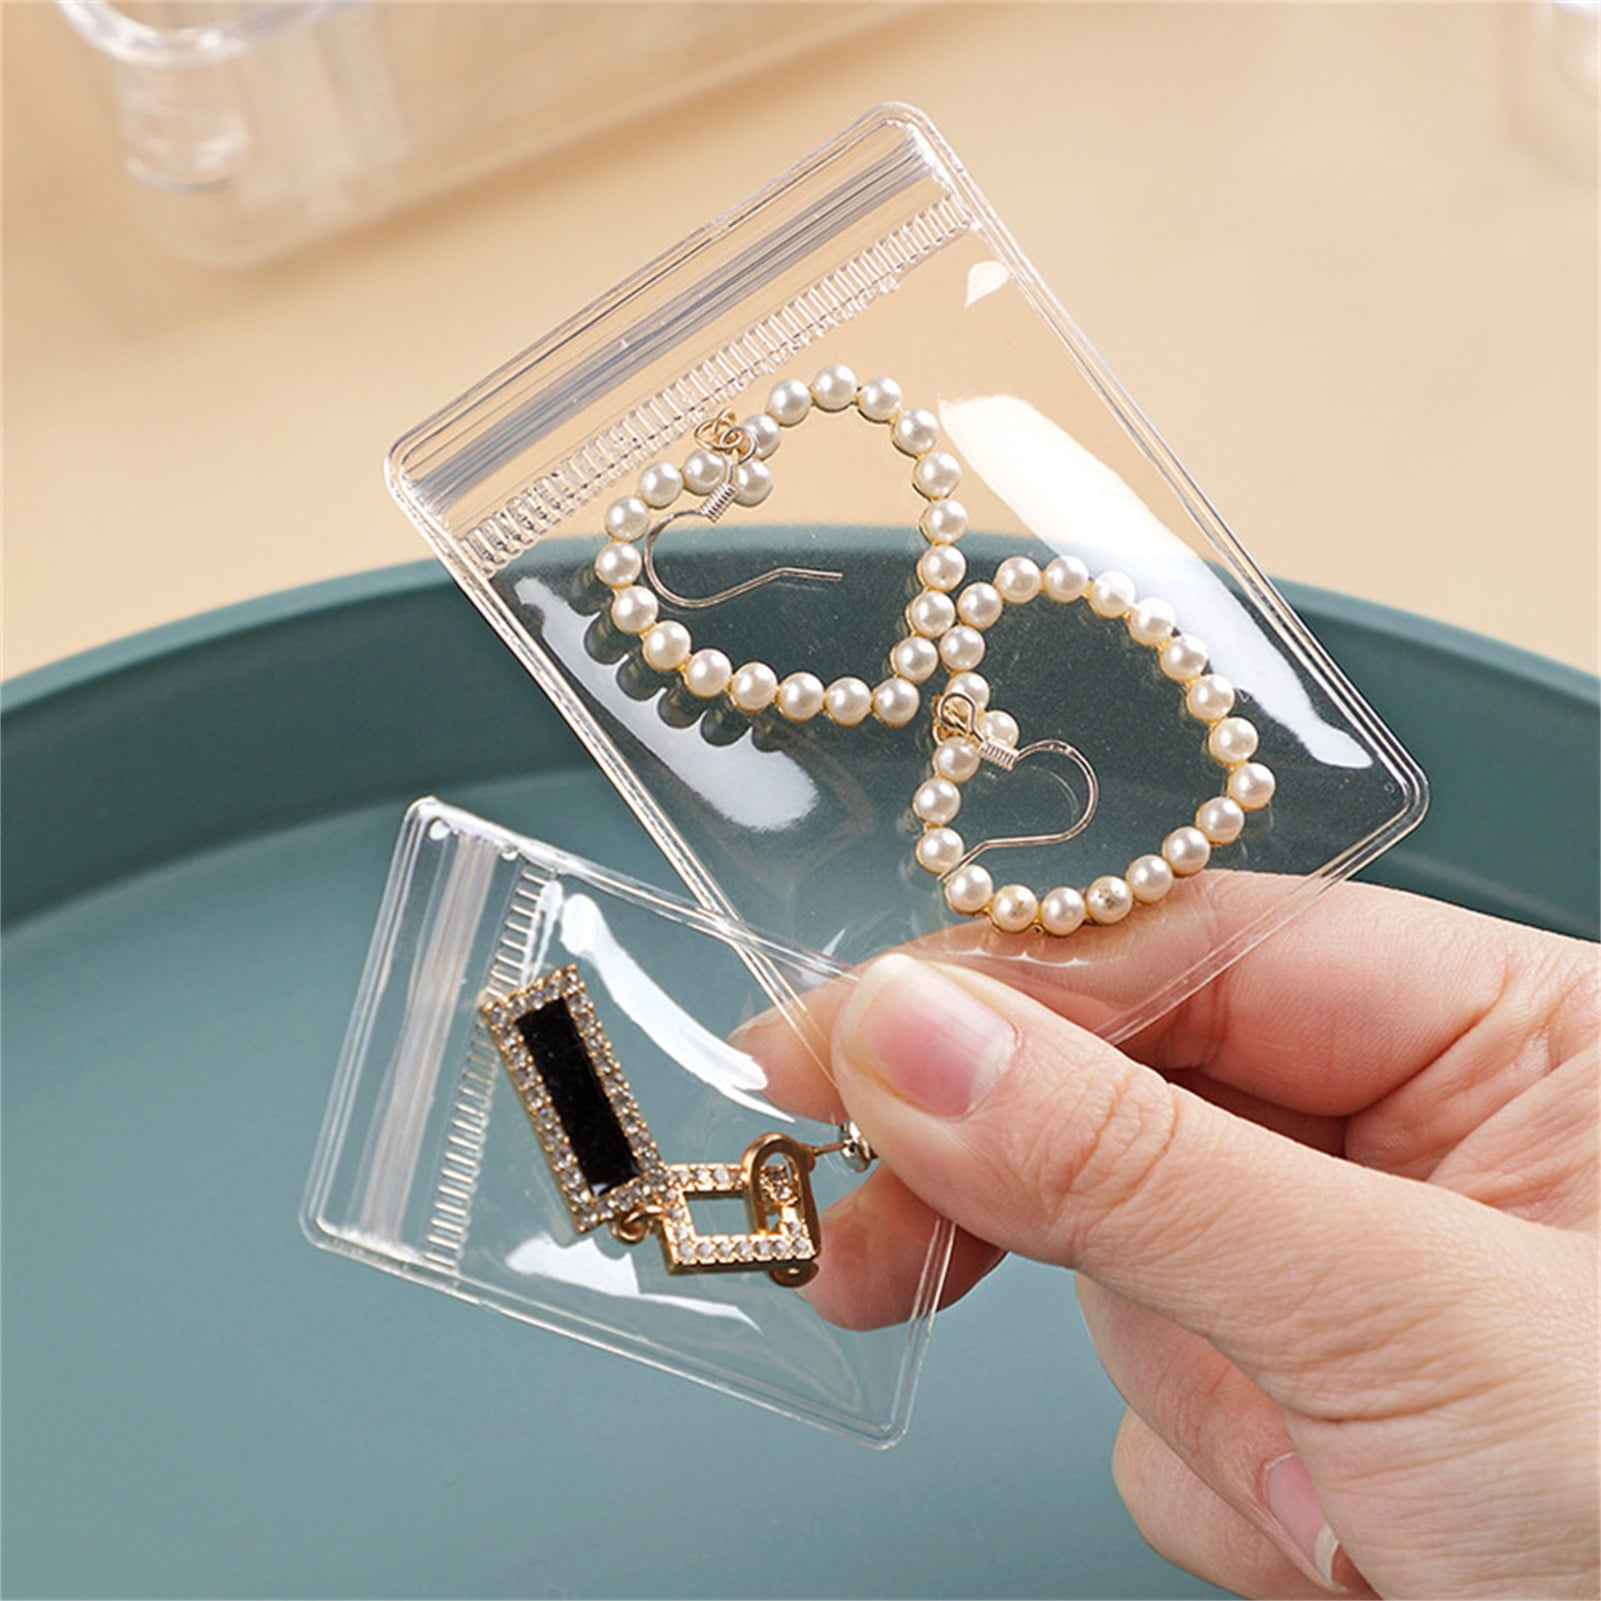 Elane 160 Pcs Small Jewelry Bags Plastic Bags for Jewelry Small Ziplock Bags for Jewelry,Clear Jewelry Bags,Clear PVC Bag